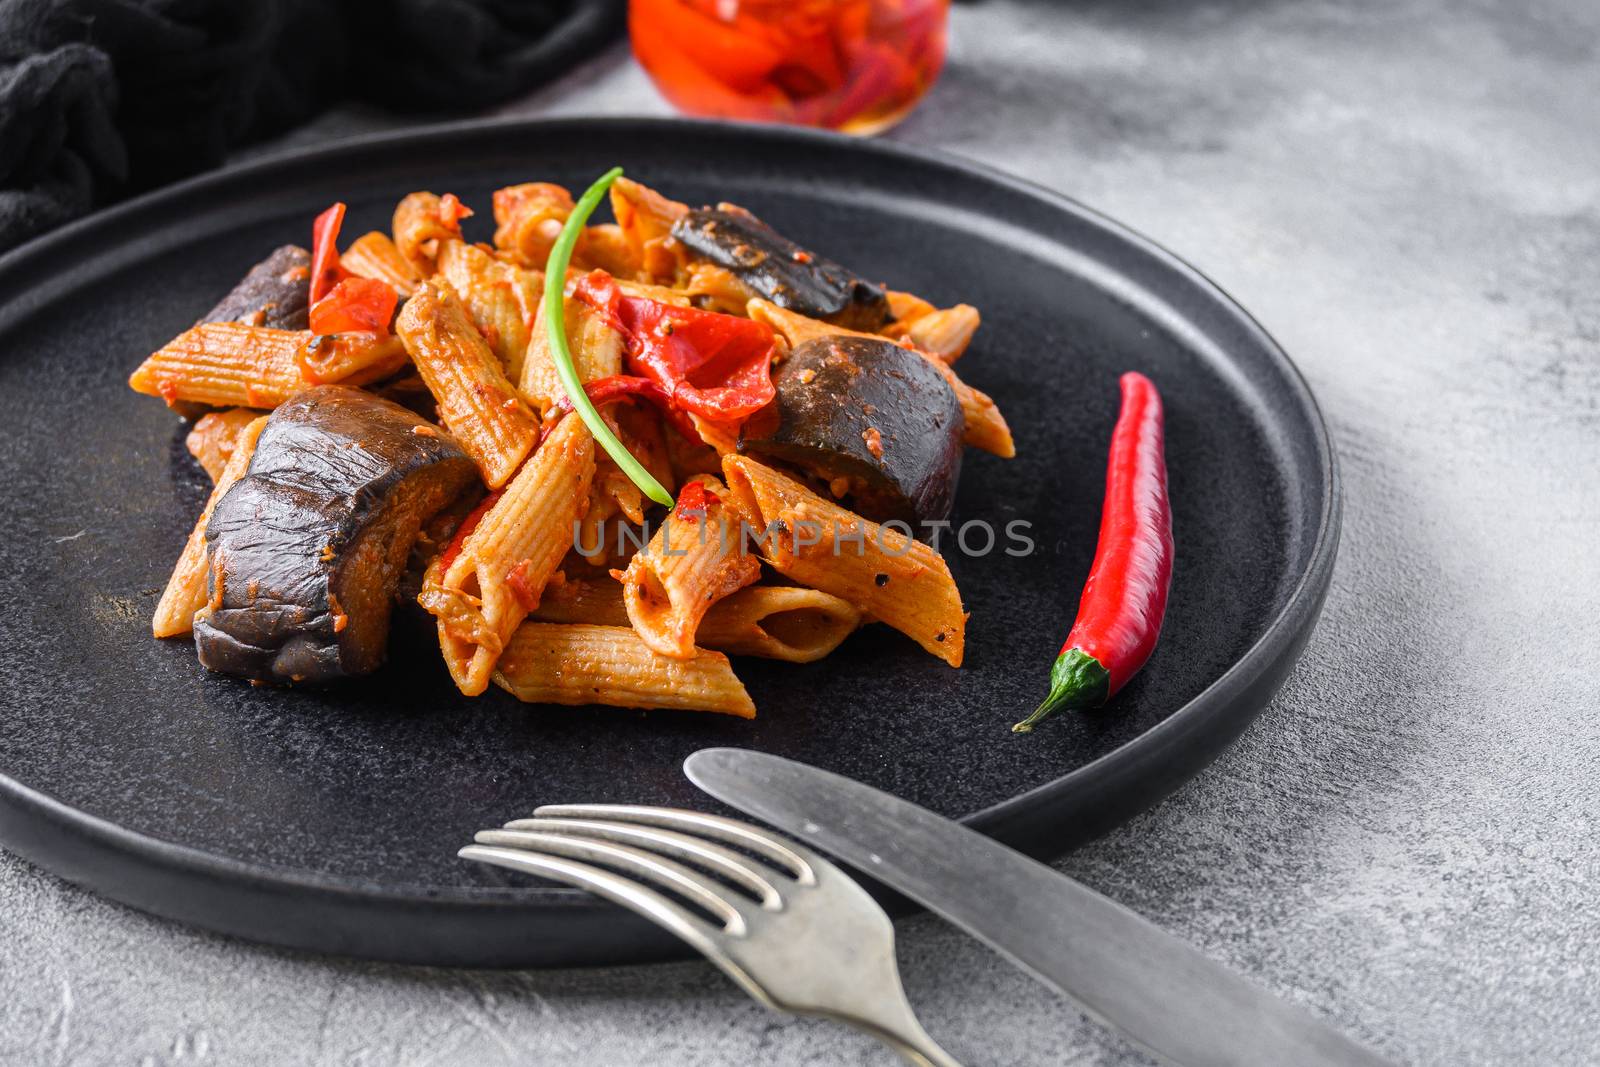 Aubergine penne eggplant pasta, pepper tomatoe sauce, on black plate overgrey concrete background served side view. by Ilianesolenyi